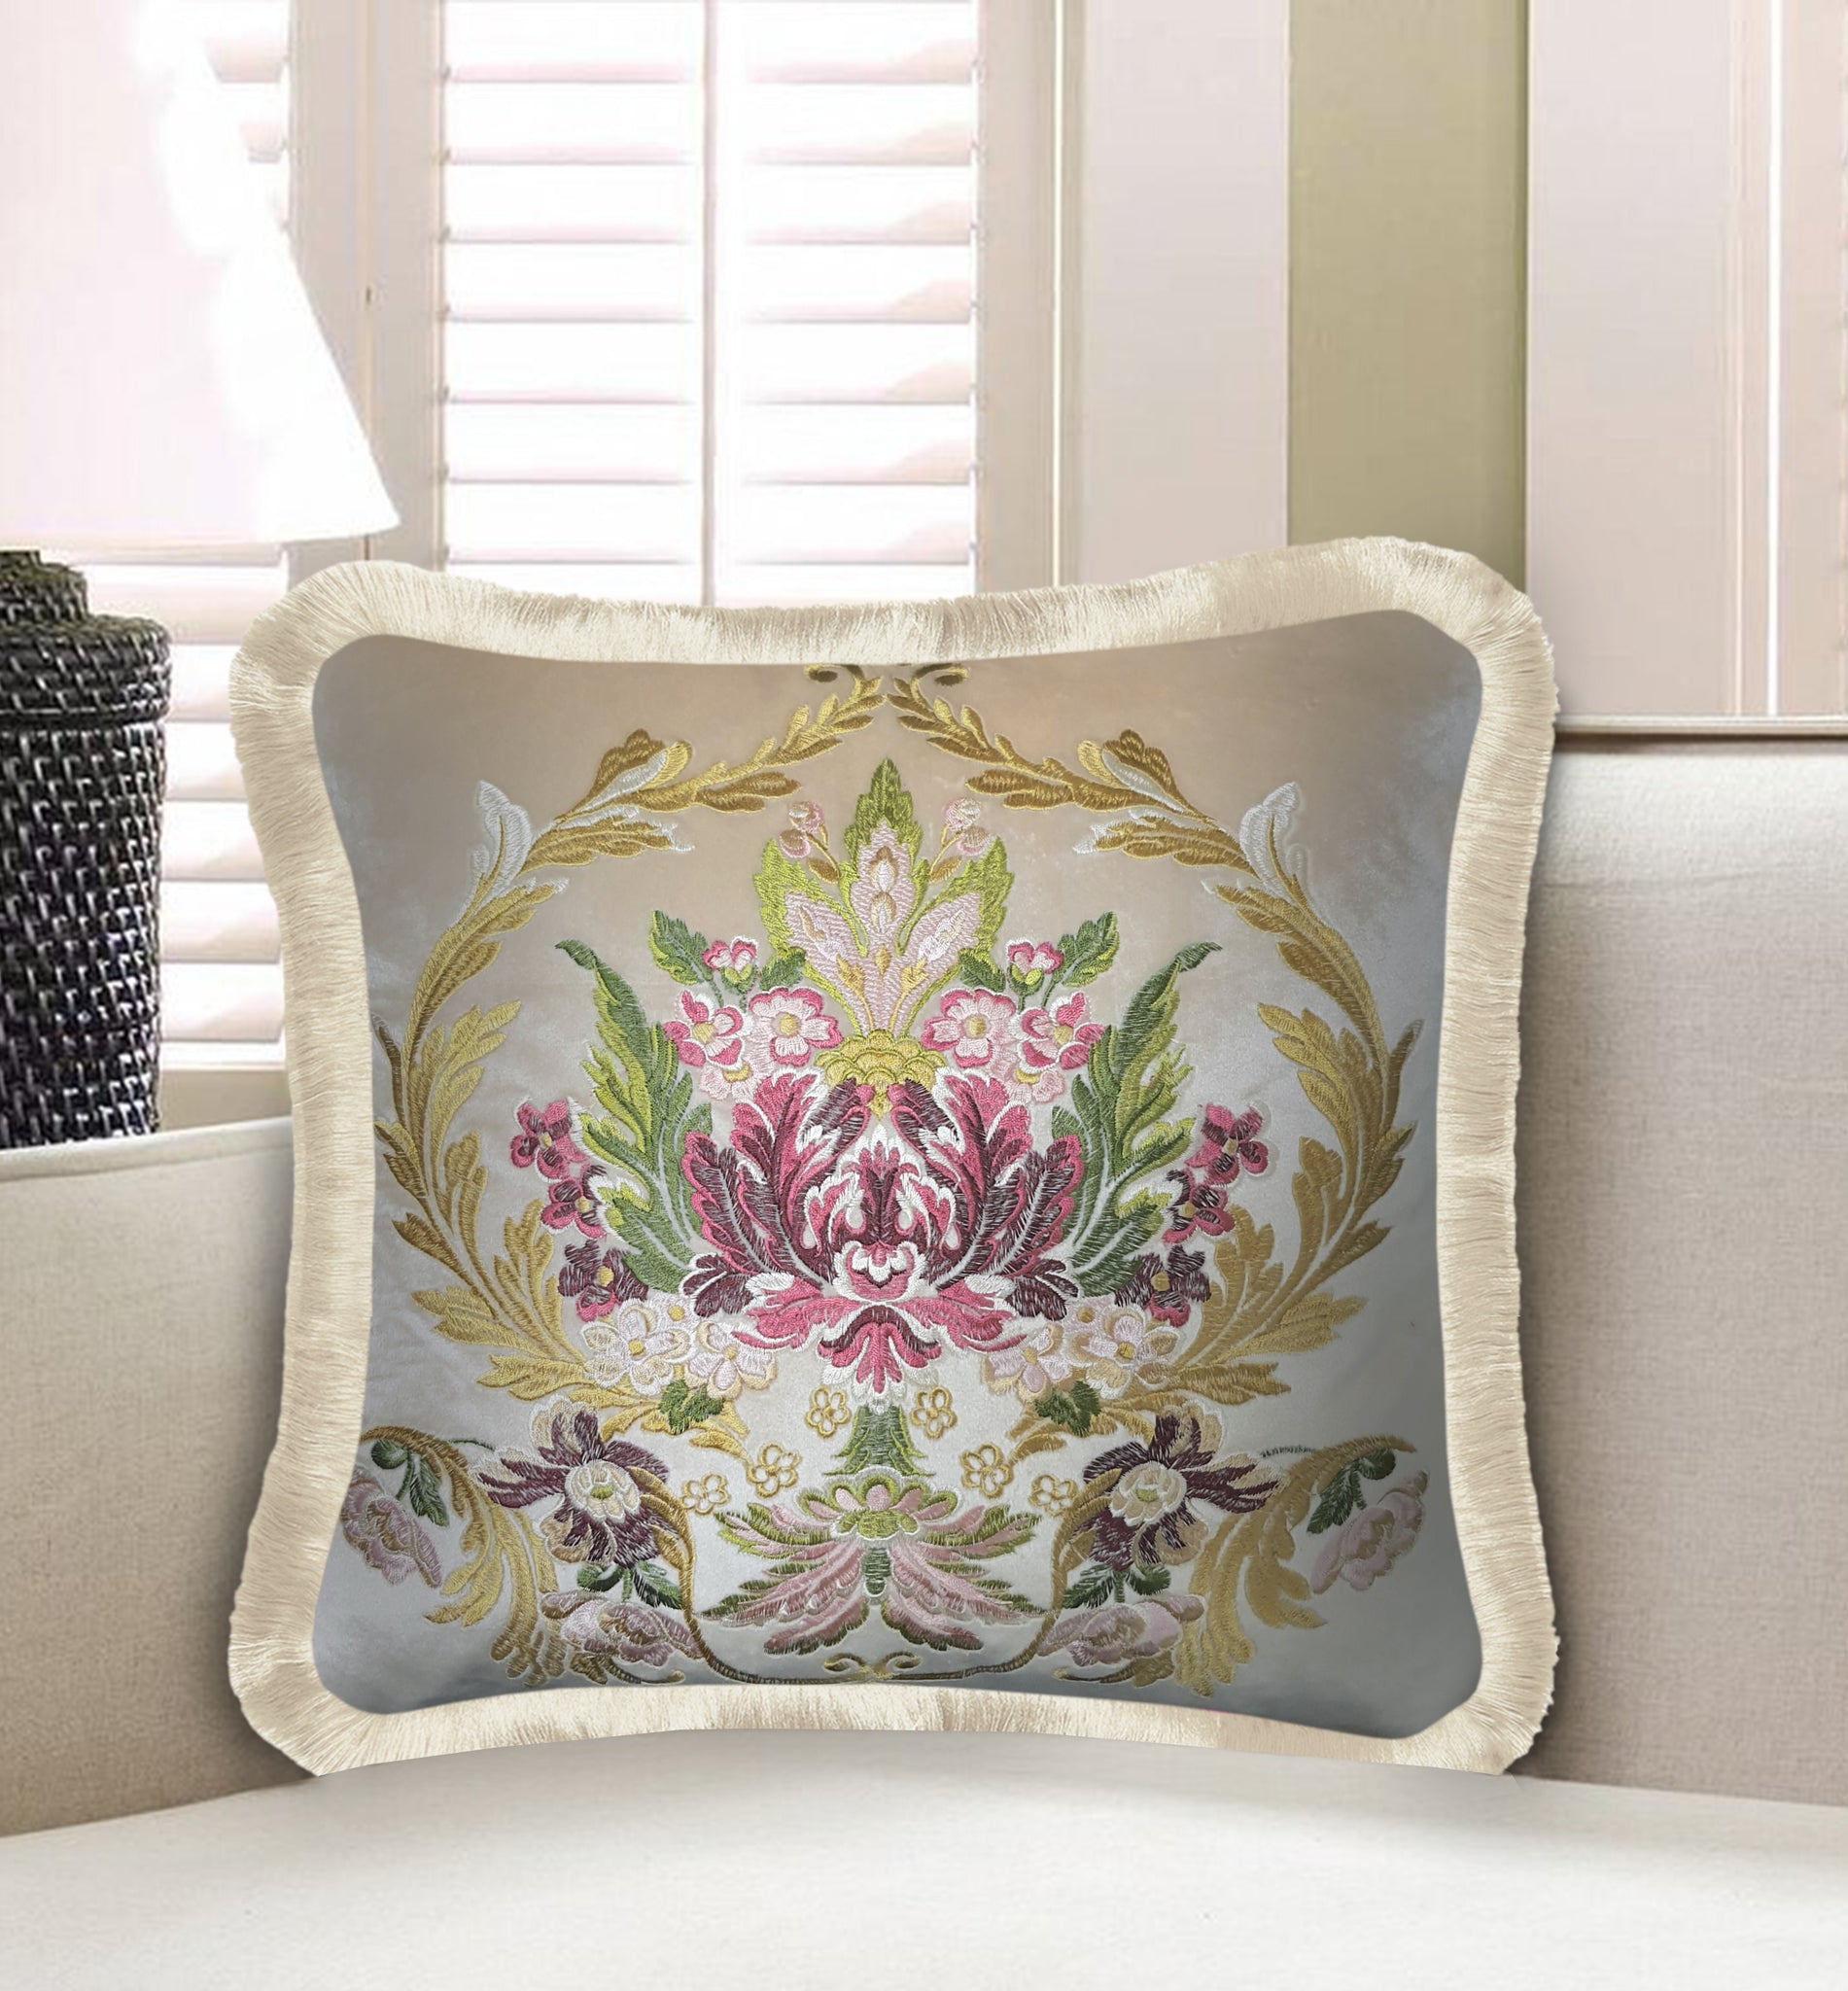 Velvet Cushion Cover Baroque Style Floral Embroidery Decorative Pillow Home Decor Throw Pillow for Sofa Chair Living Room 45x45 cm 18x18 In